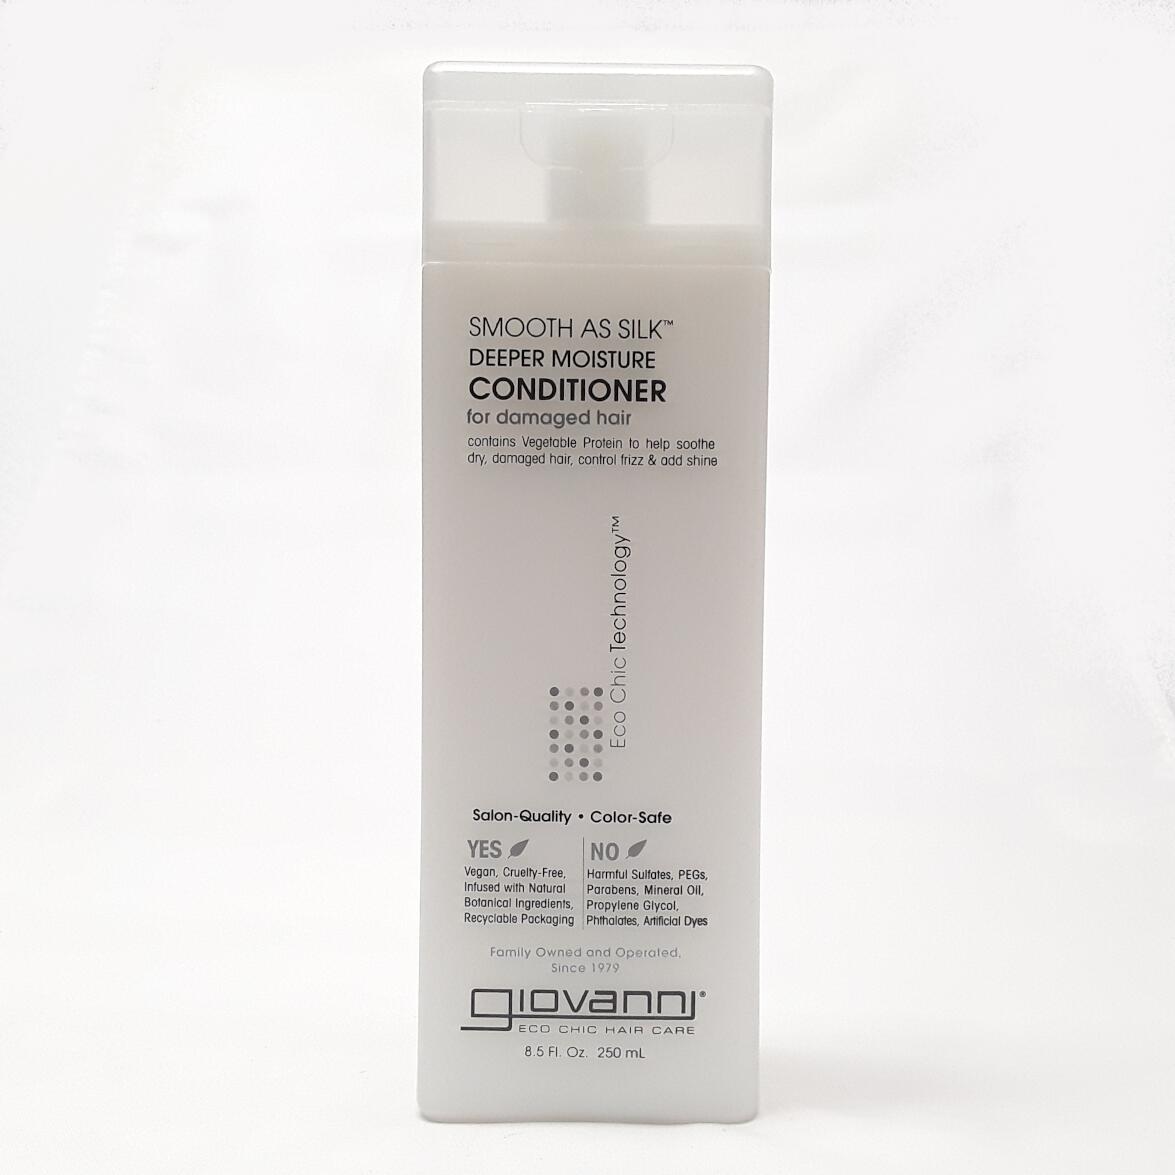 Giovanni Smooth as Silk Deeper Moisture Conditioner Website Product Image View